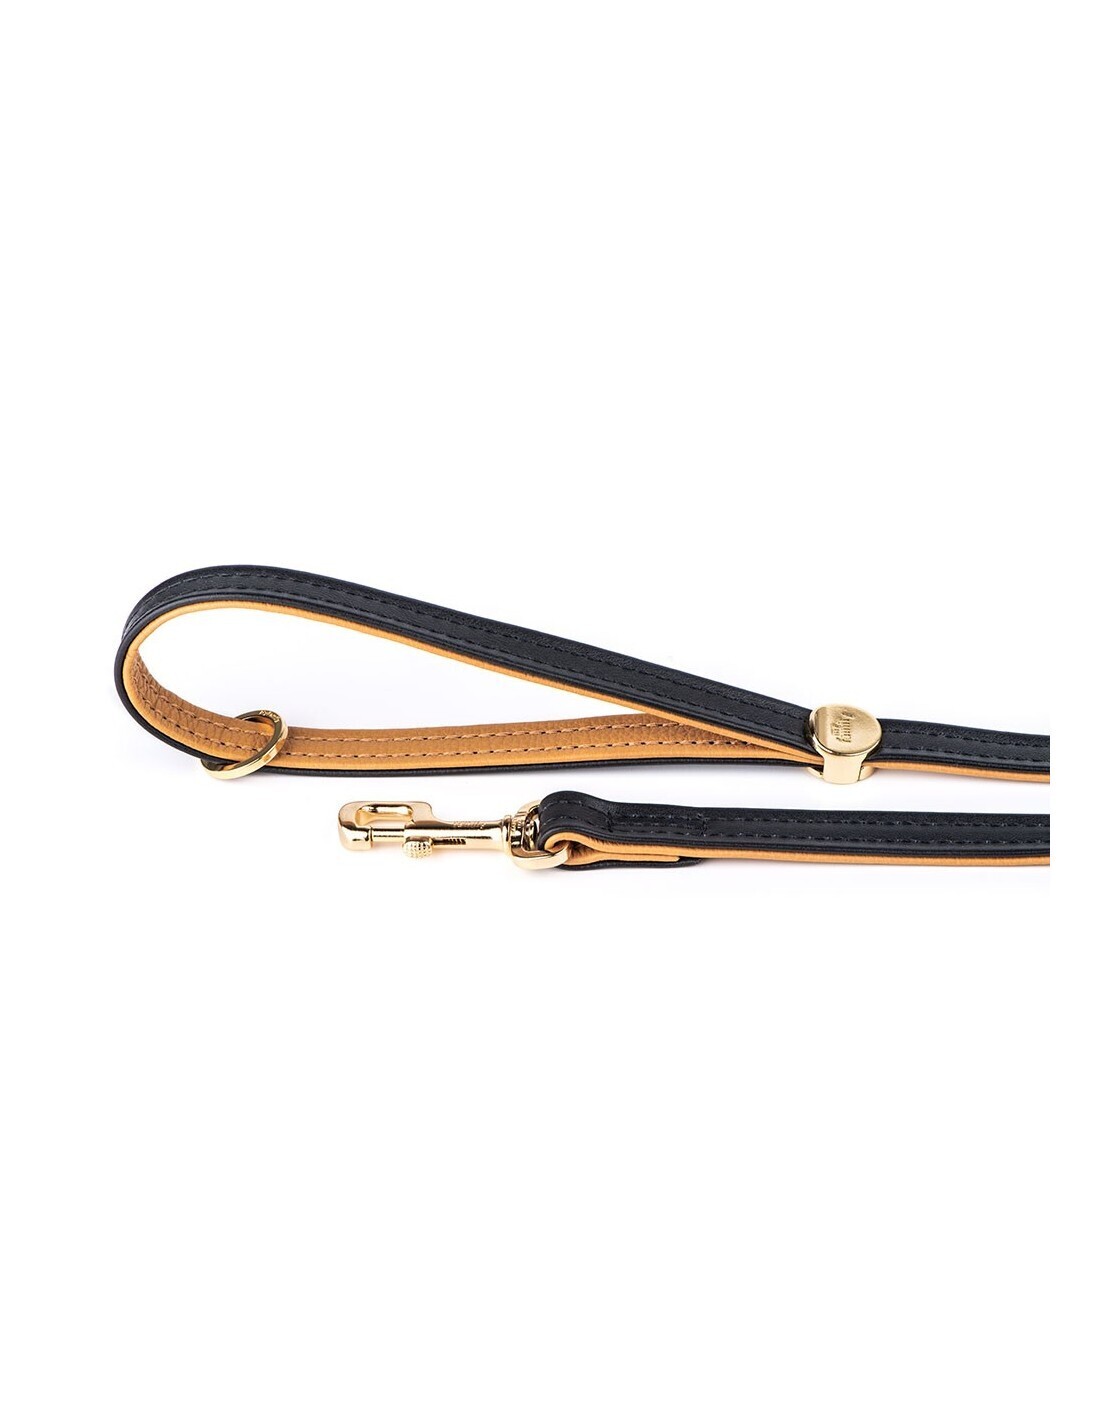 MyFamily Hermitage Dog Leash in Genuine Italian Black Leather with 24K Gold Plated finishing